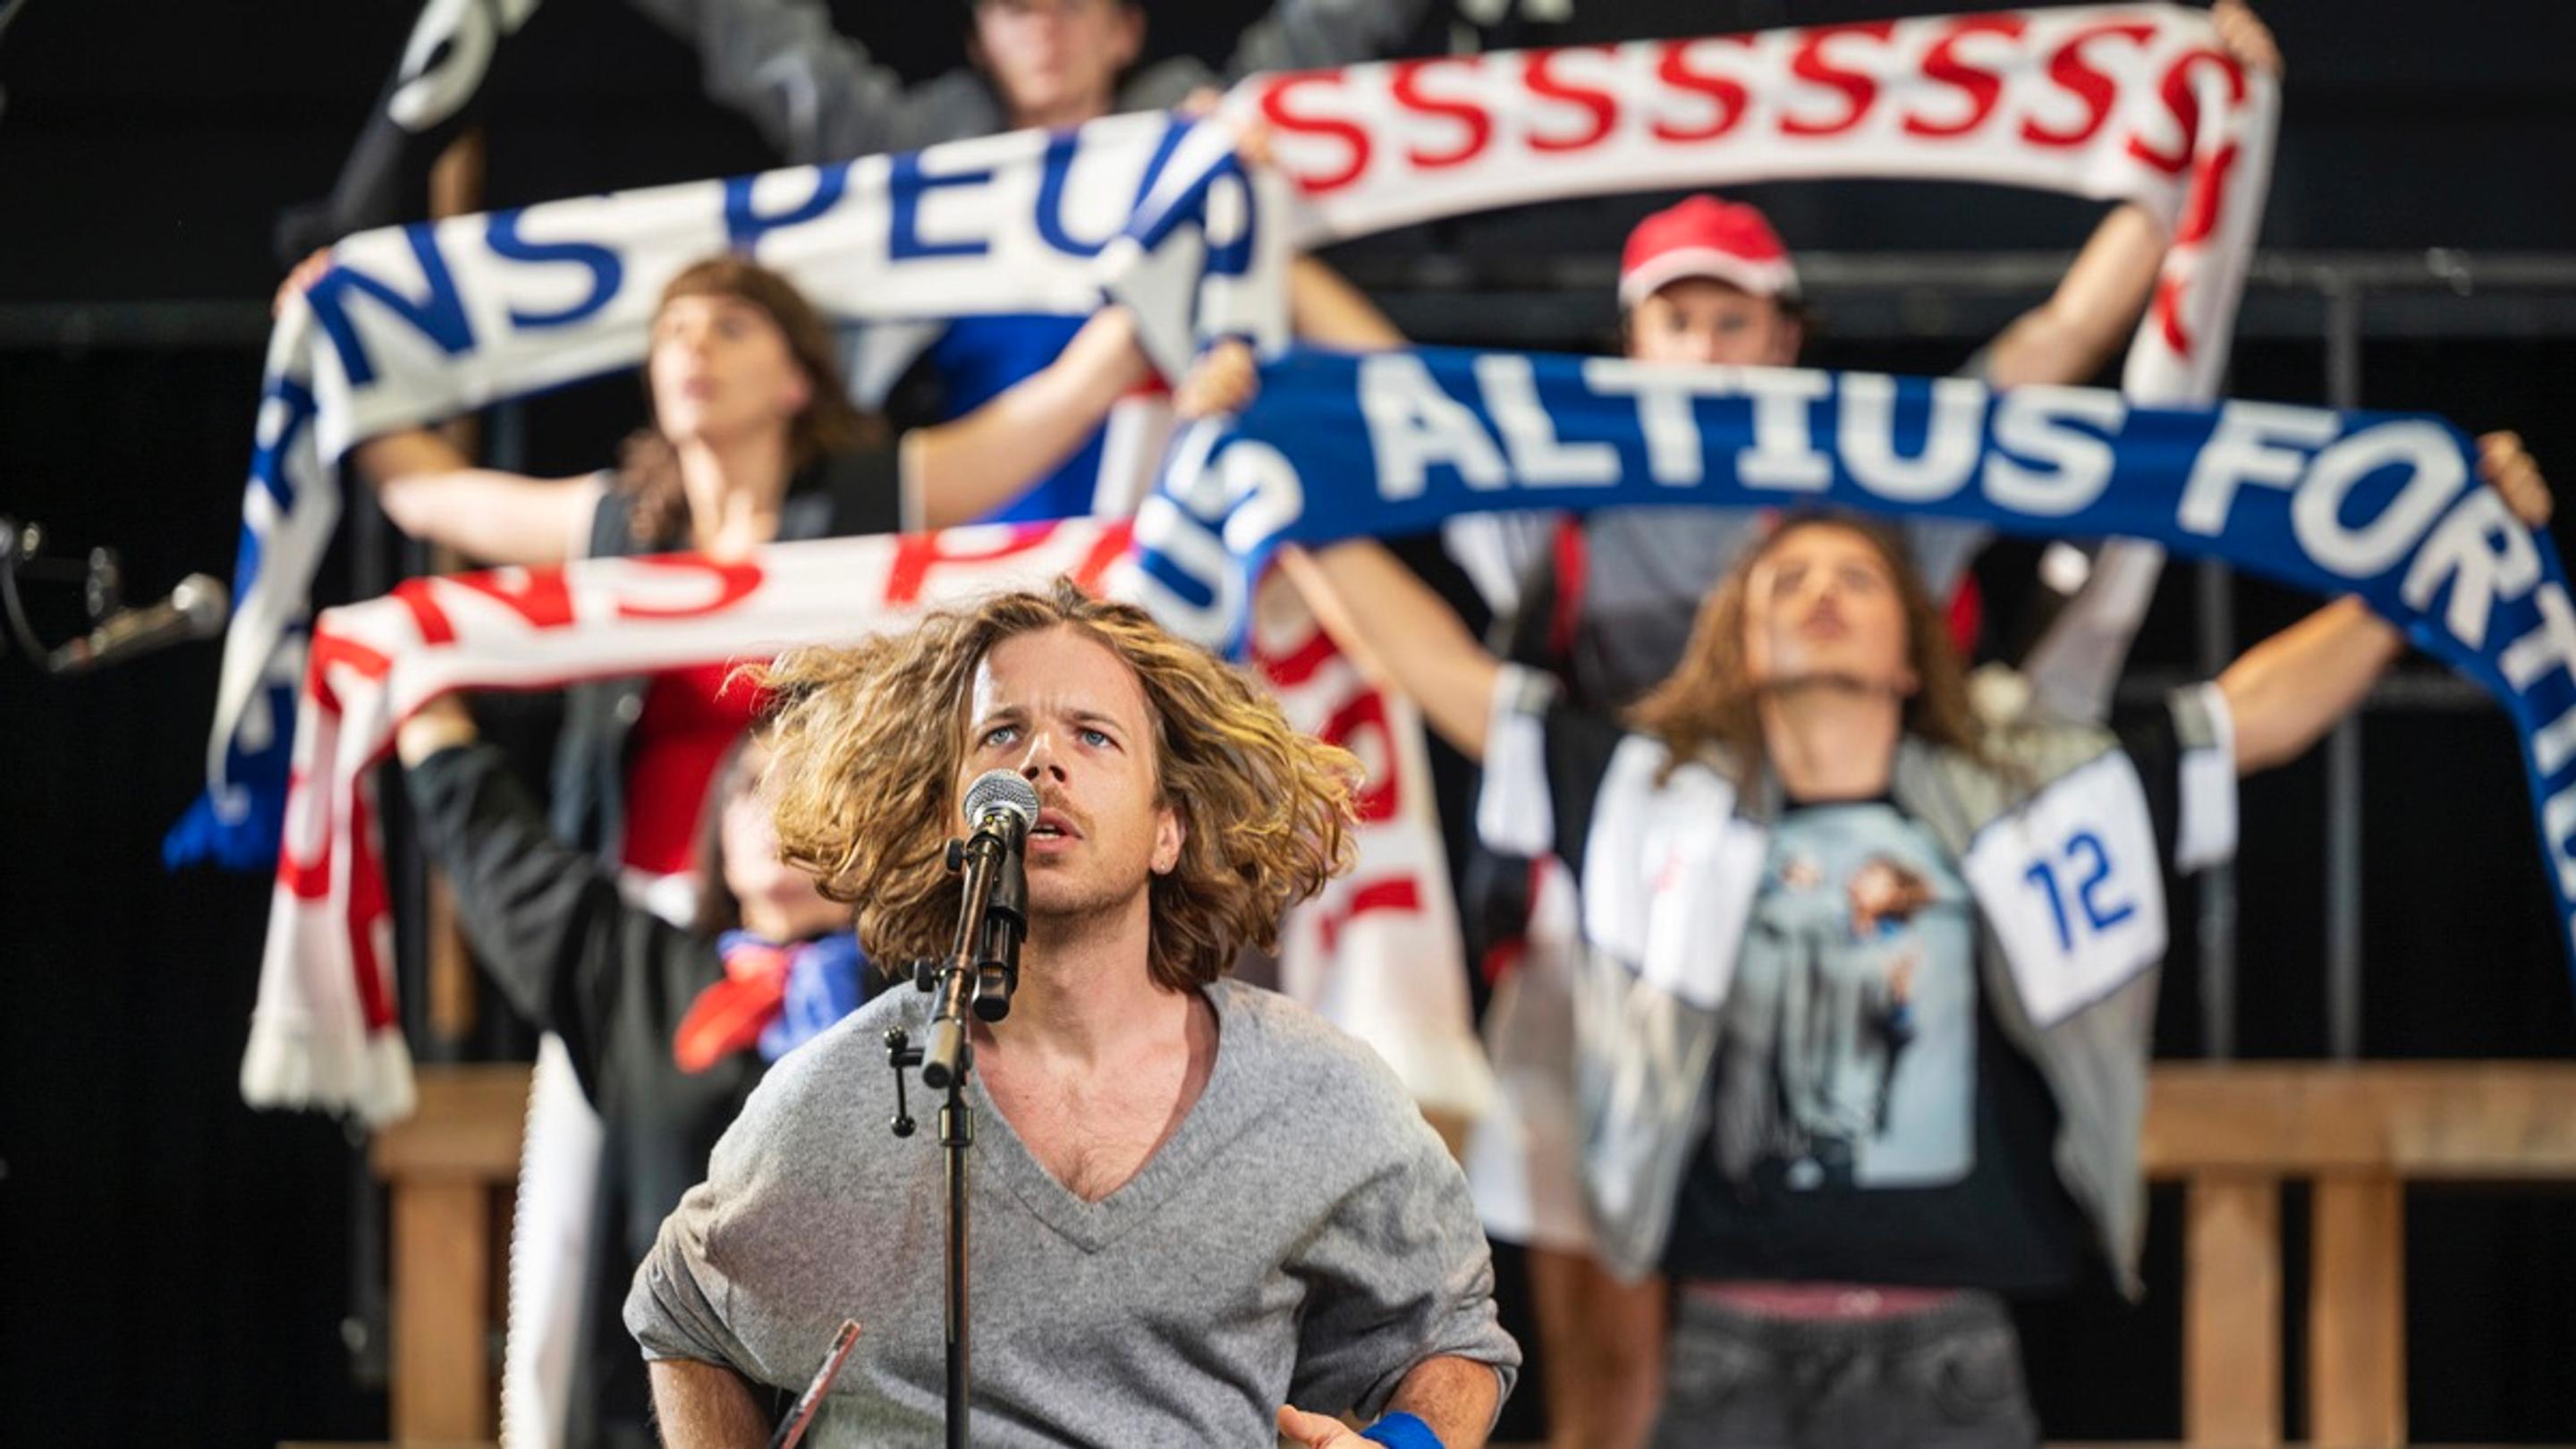 A performer stands in front of a microphone looking intently above the camera. Behind them, members of an ensemble stand on a grandstand holding scarves for the audience to see.